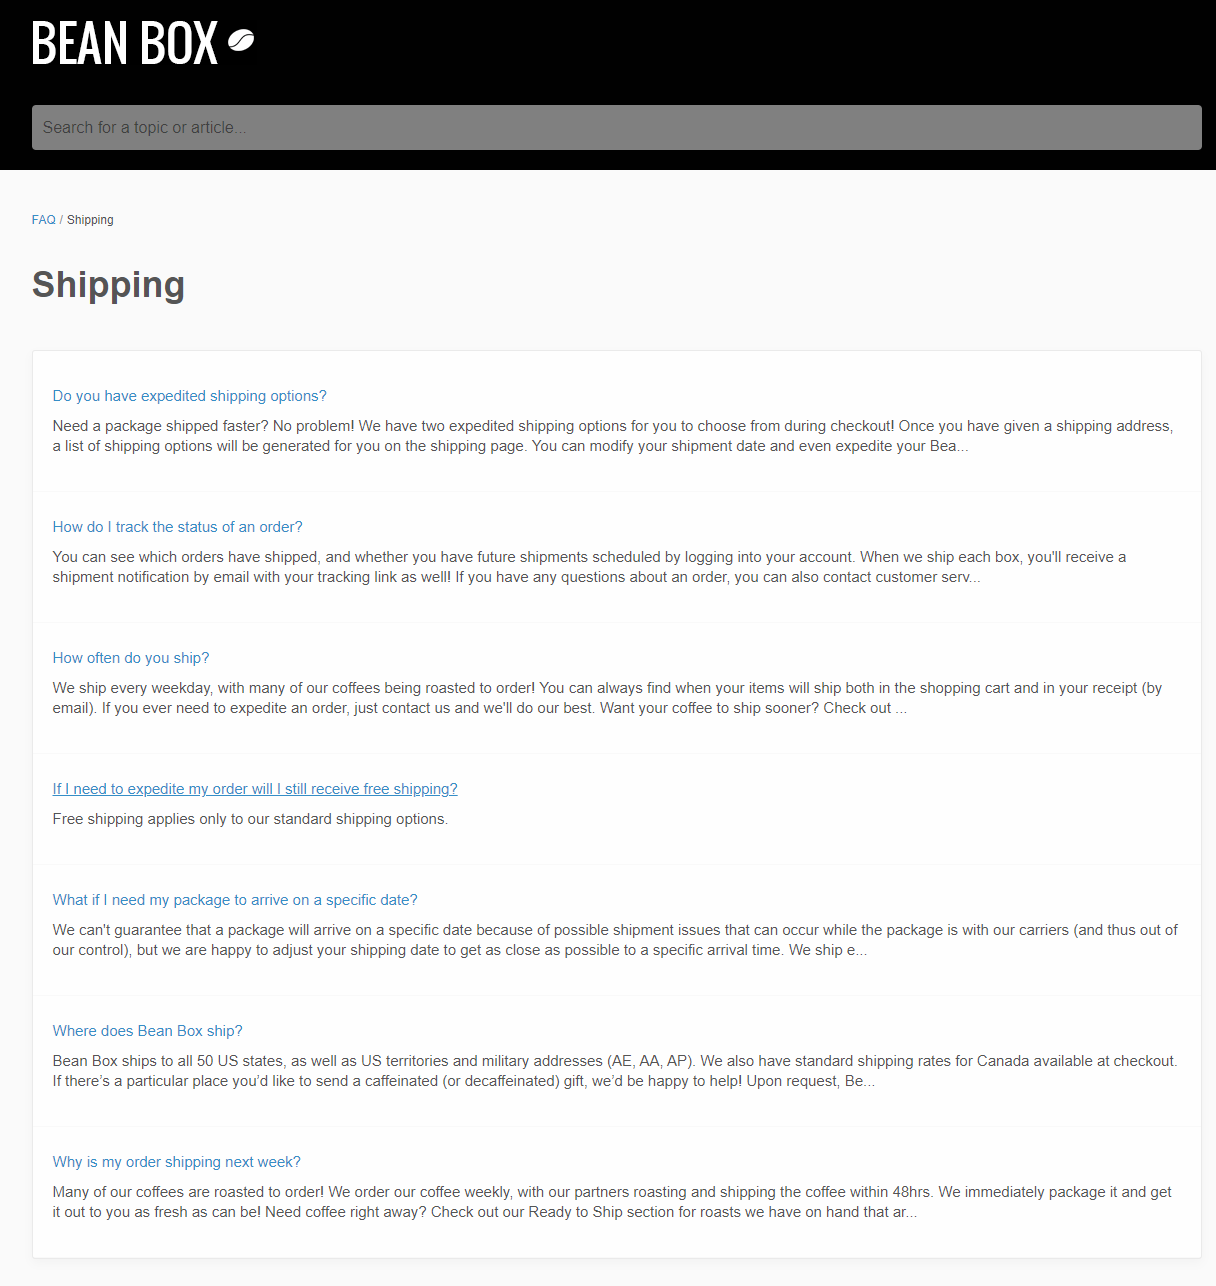 BeanBox shipping policy